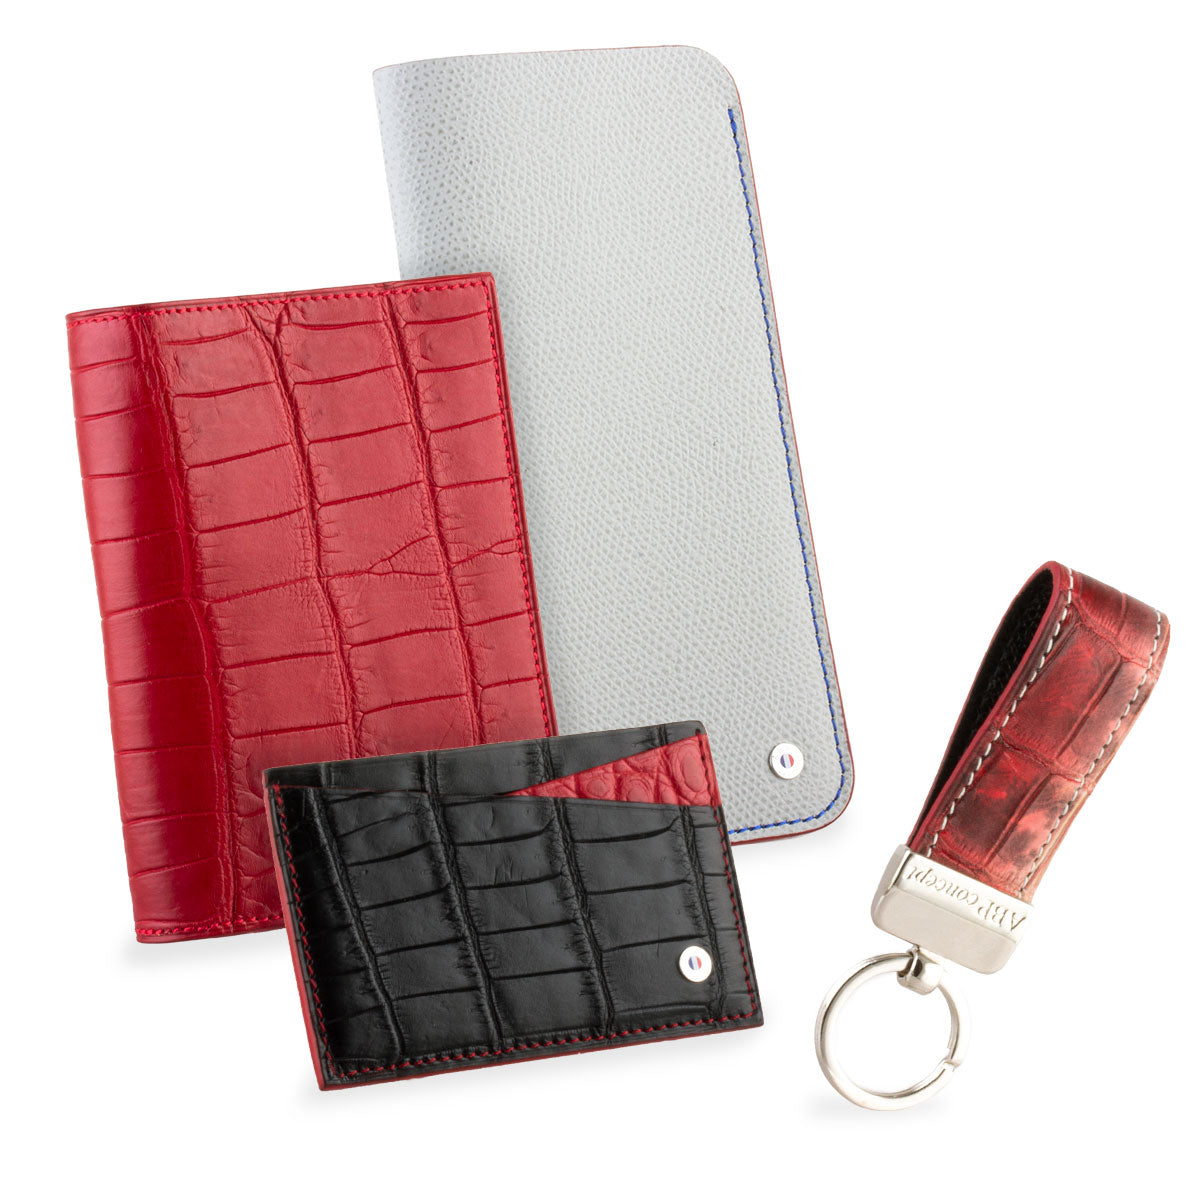 Valentine's Day" pack - Small leather goods set